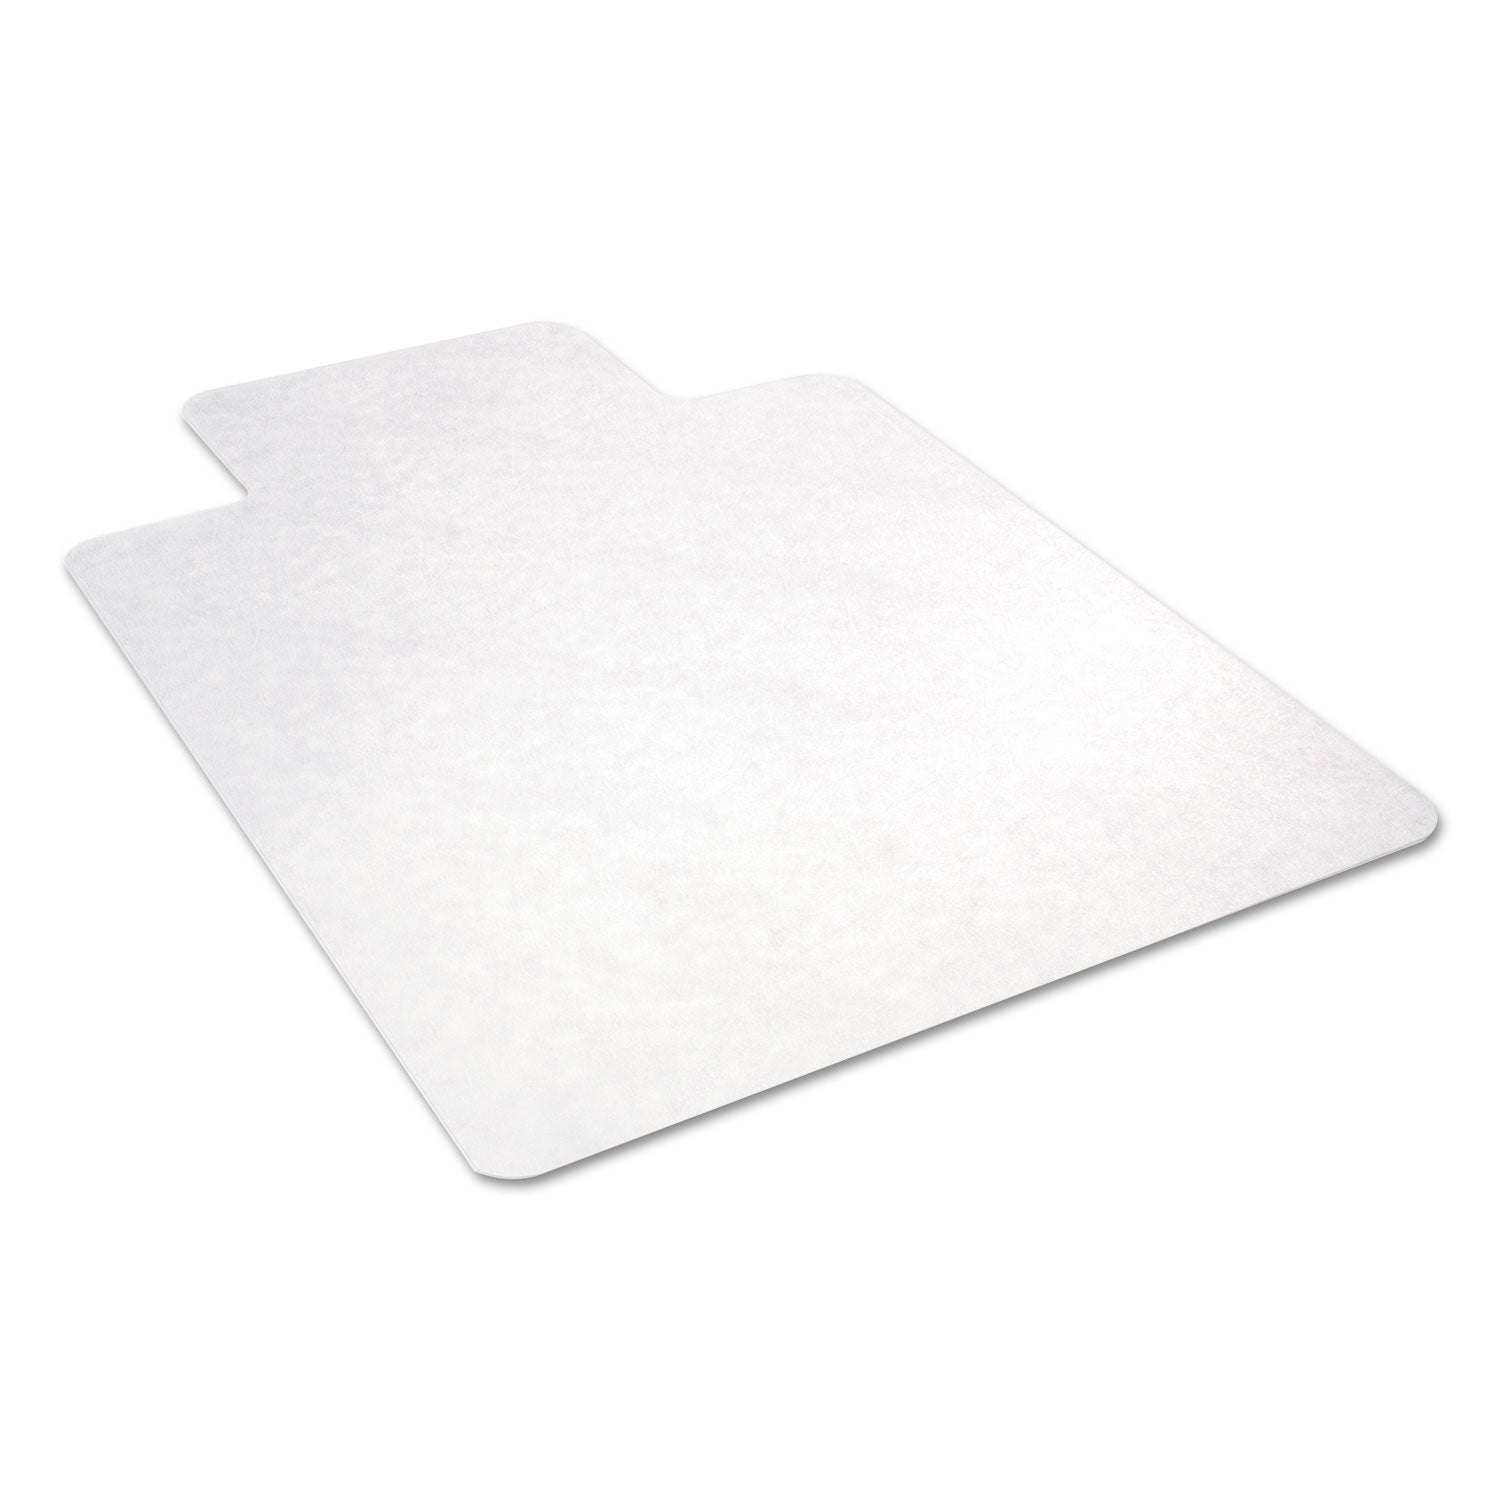 all-day-use-non-studded-chair-mat-for-hard-floors-45-x-53-wide-lipped-clear_alemat4553hfl - 6